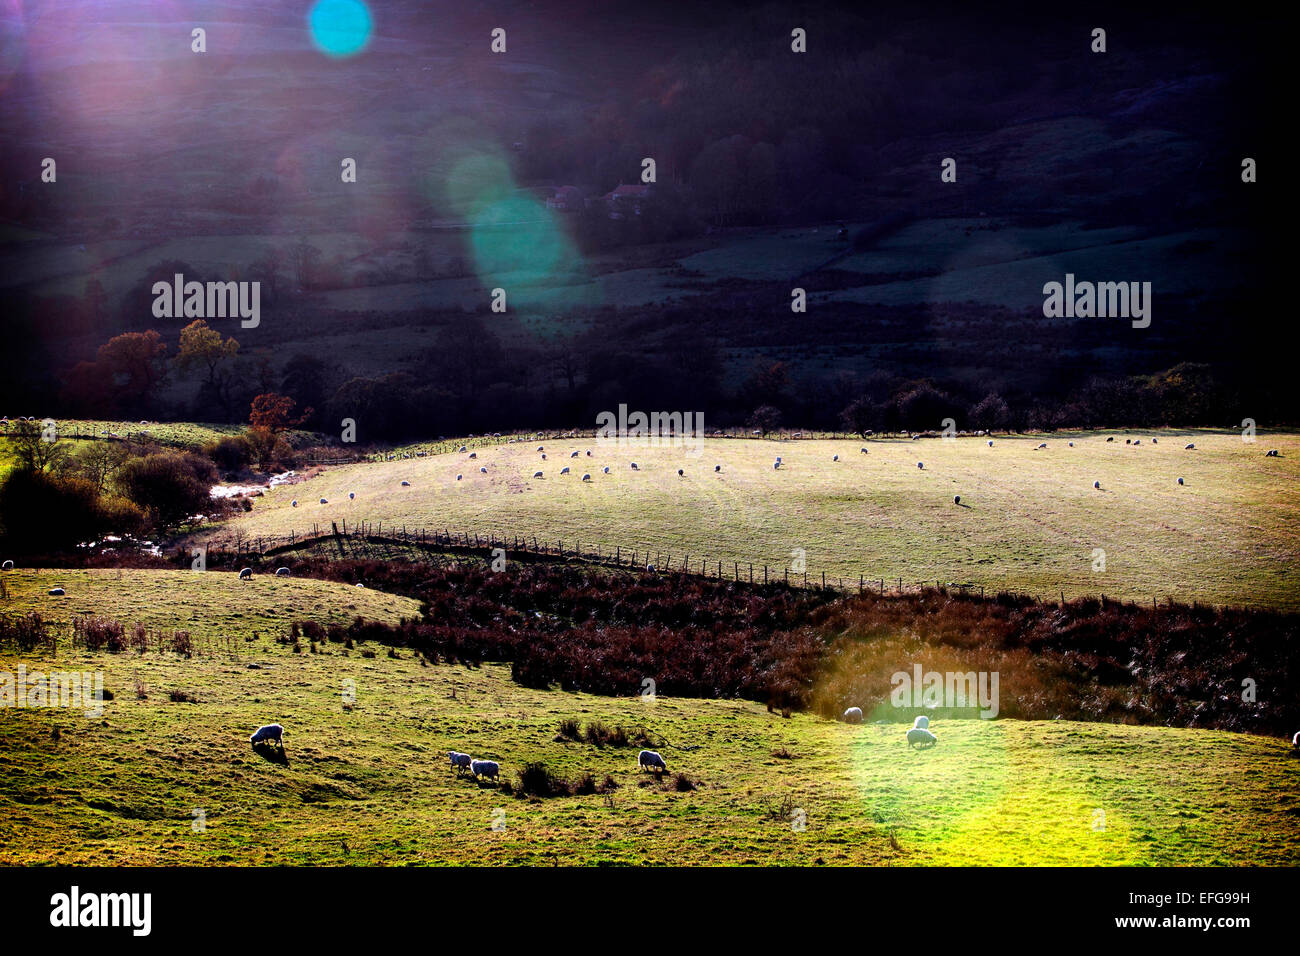 Landscape with sheep grazing in sunlit fields, Yorkshire Dales, England, UK Stock Photo